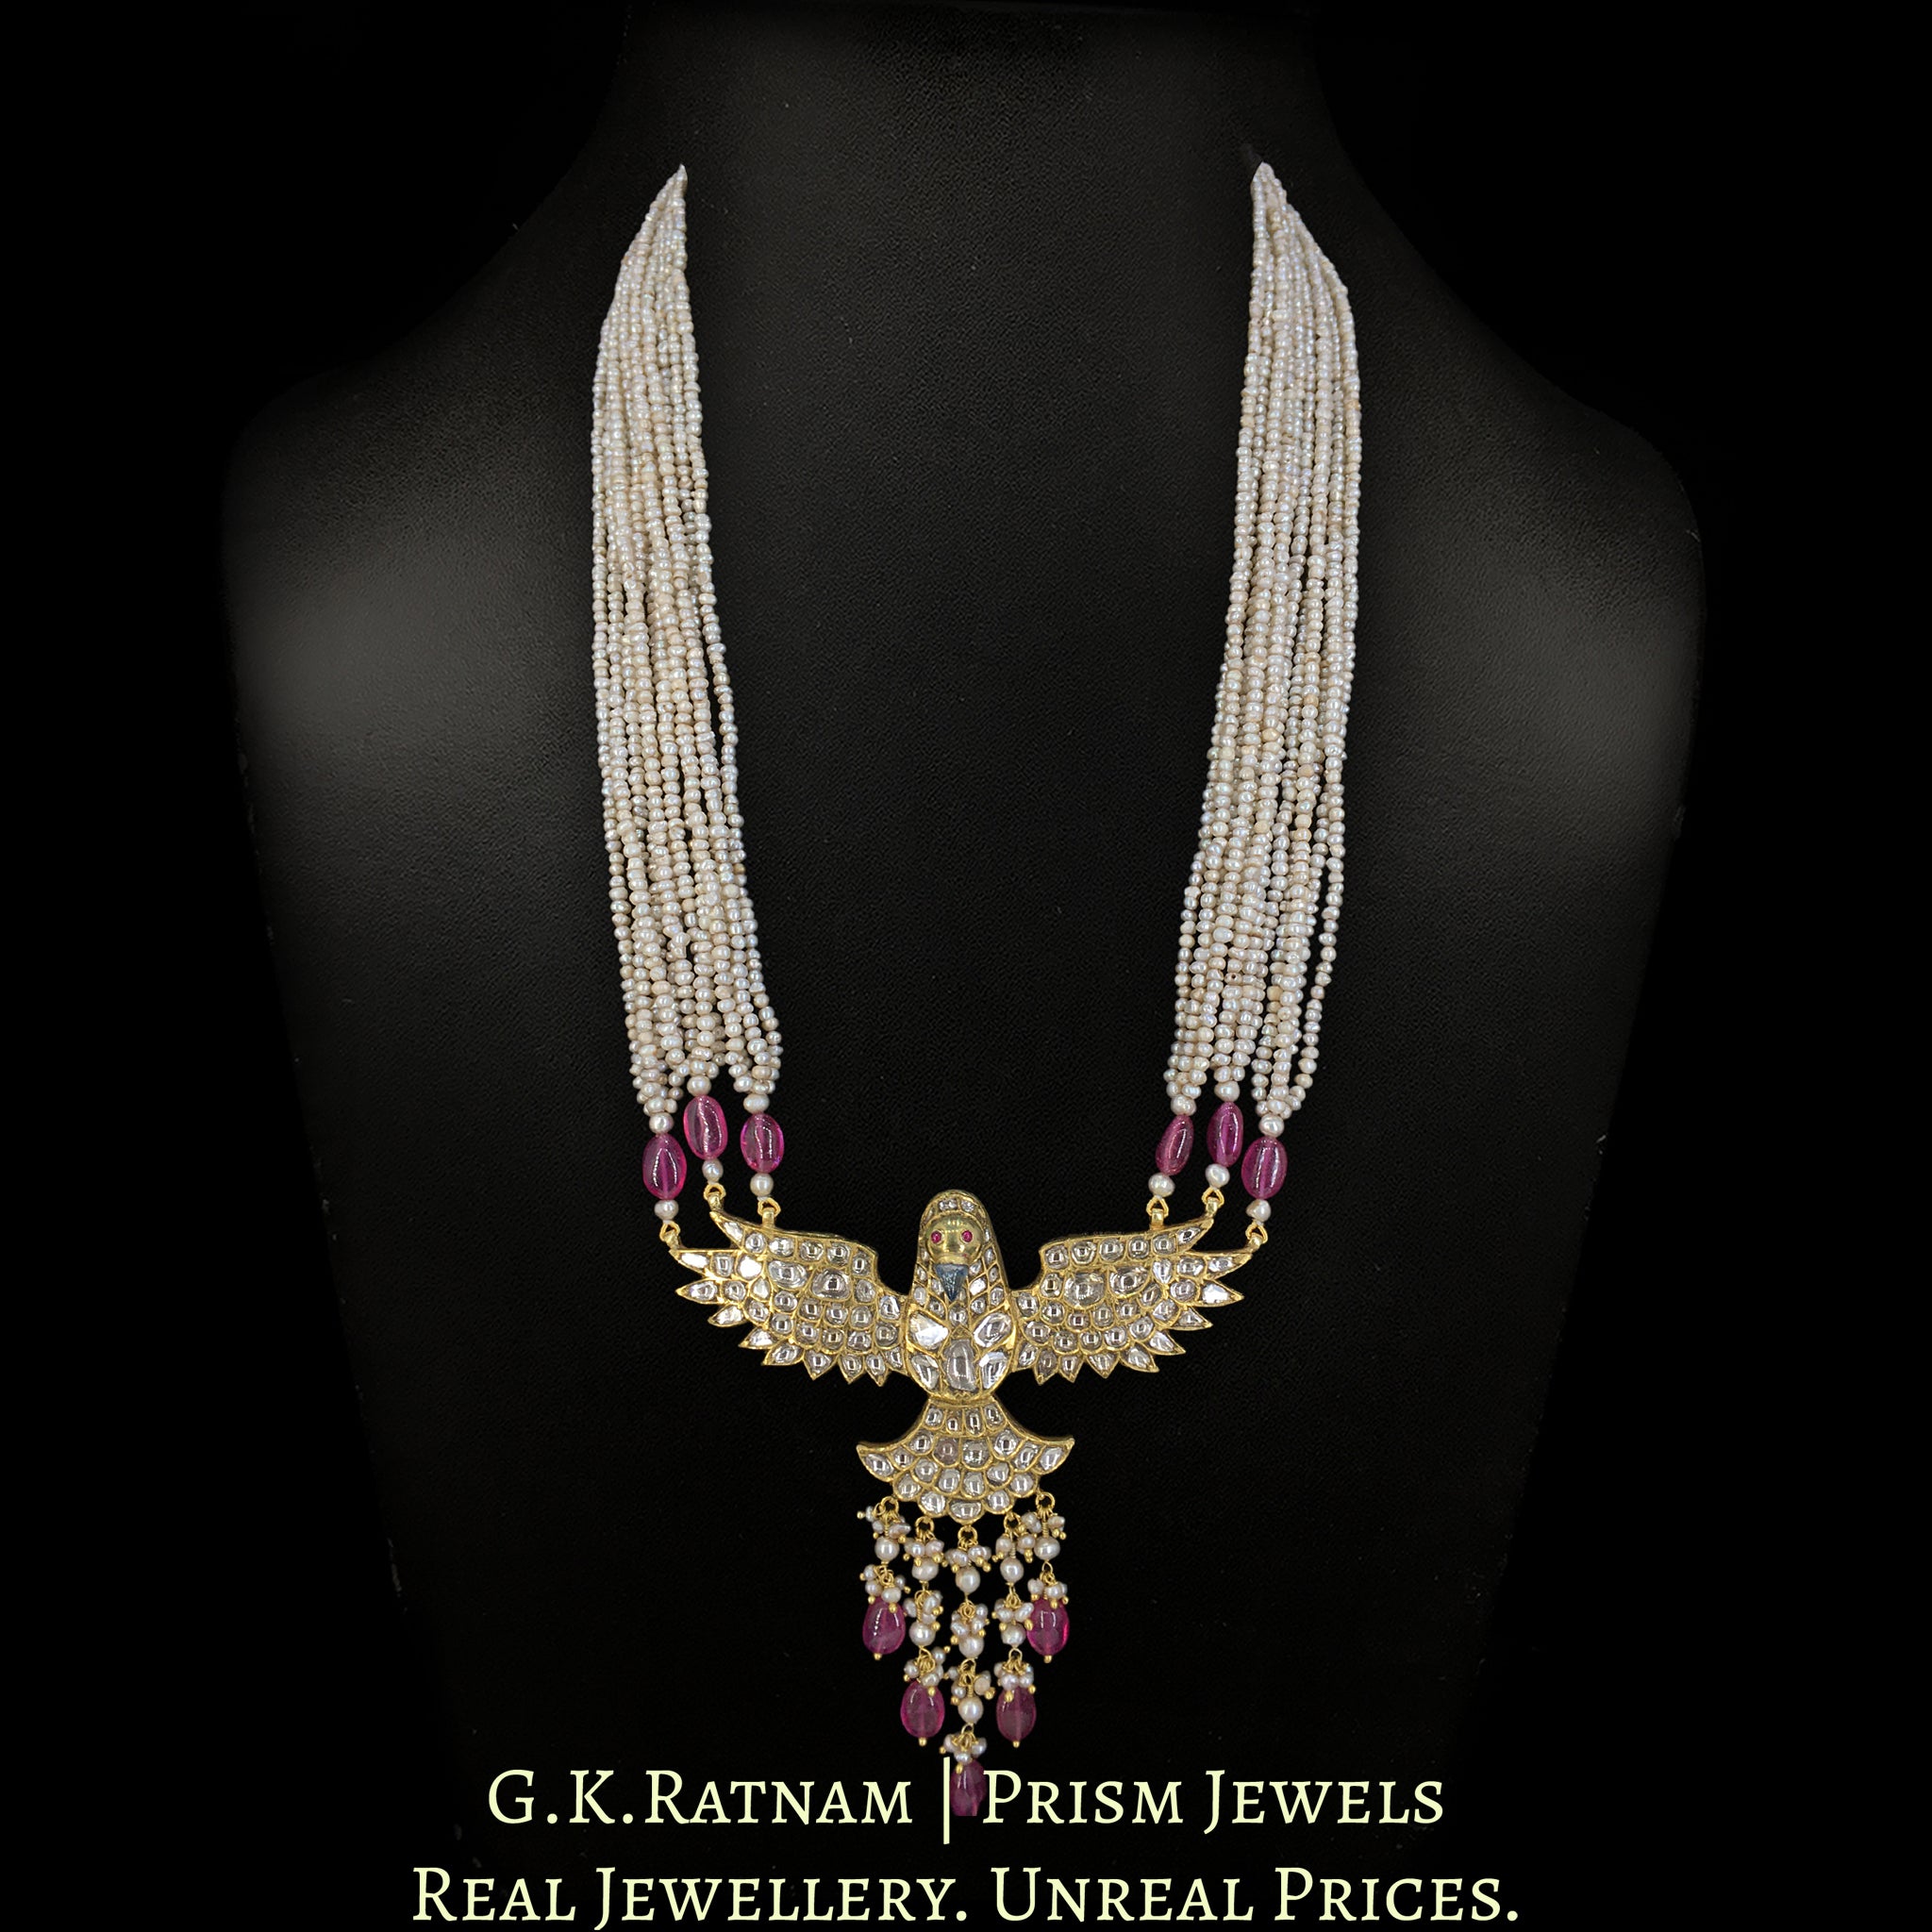 18k Gold and Diamond Polki Eagle Pendant with Antiqued Freshwater Pearls and Rubies